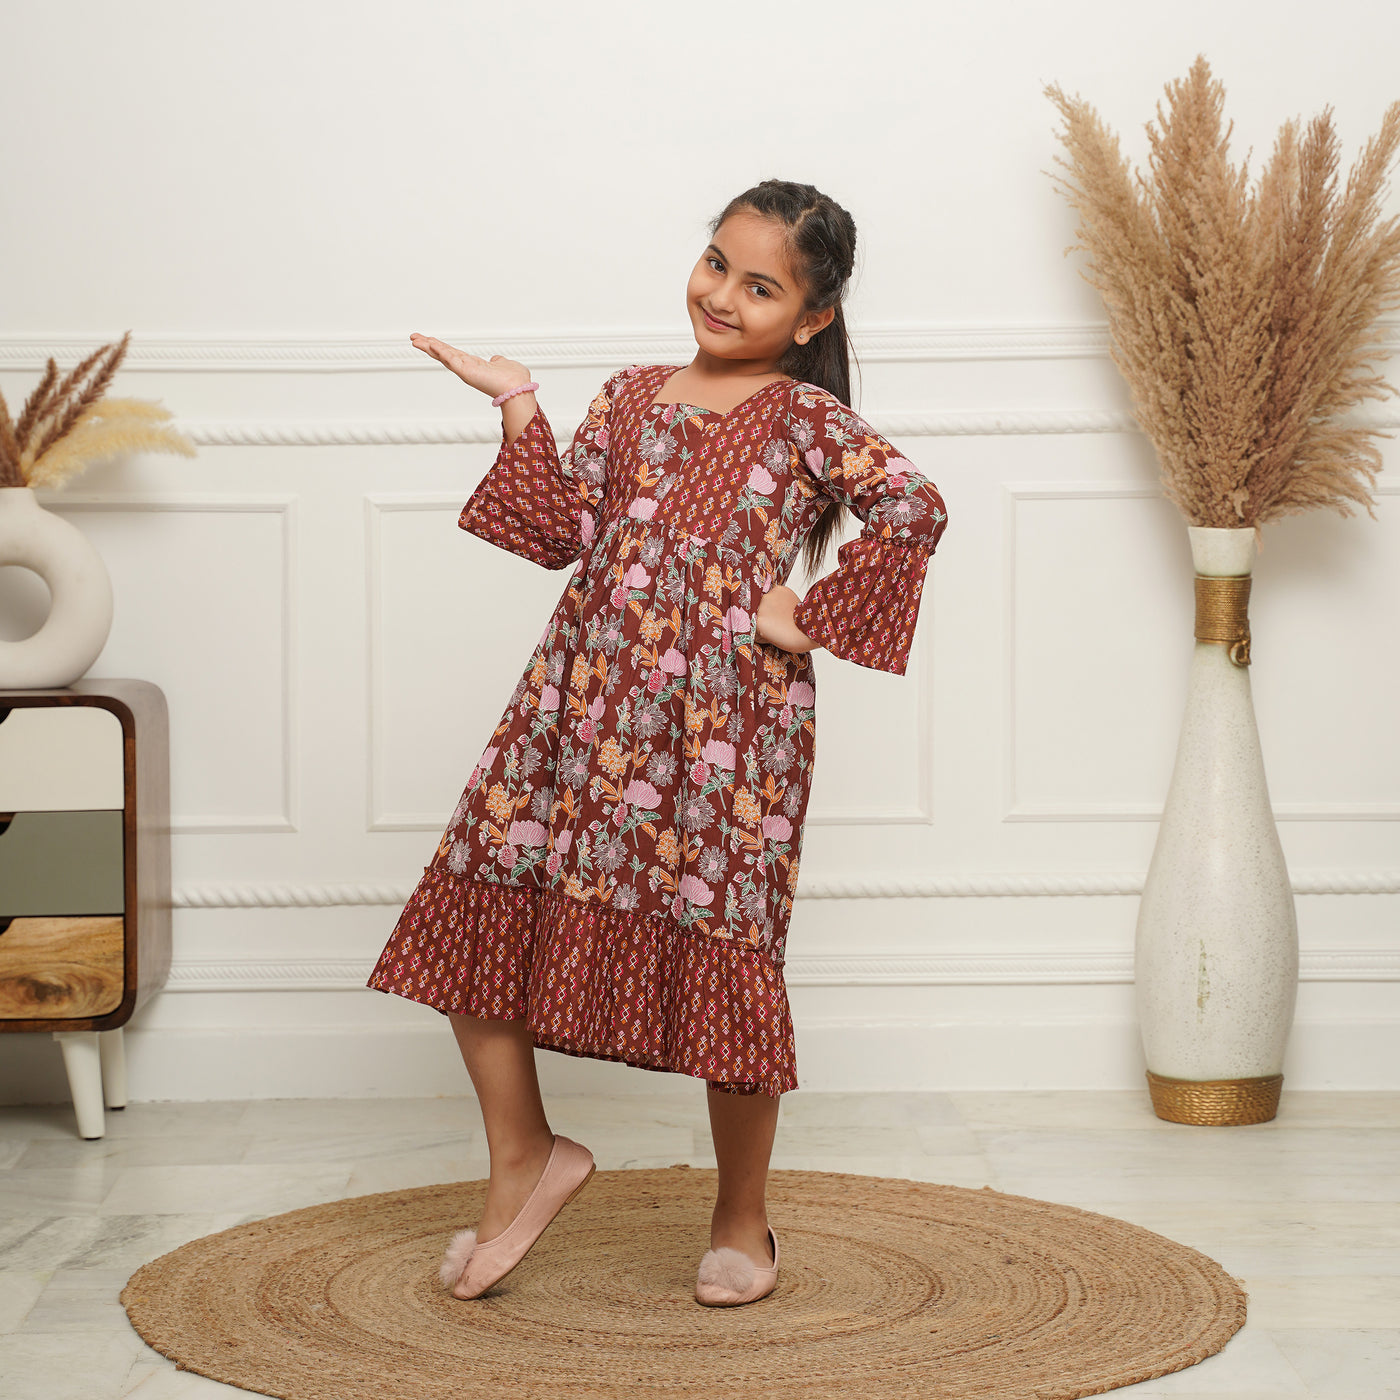 'Brown Mosaic' Mom and Daughter Cotton Dresses